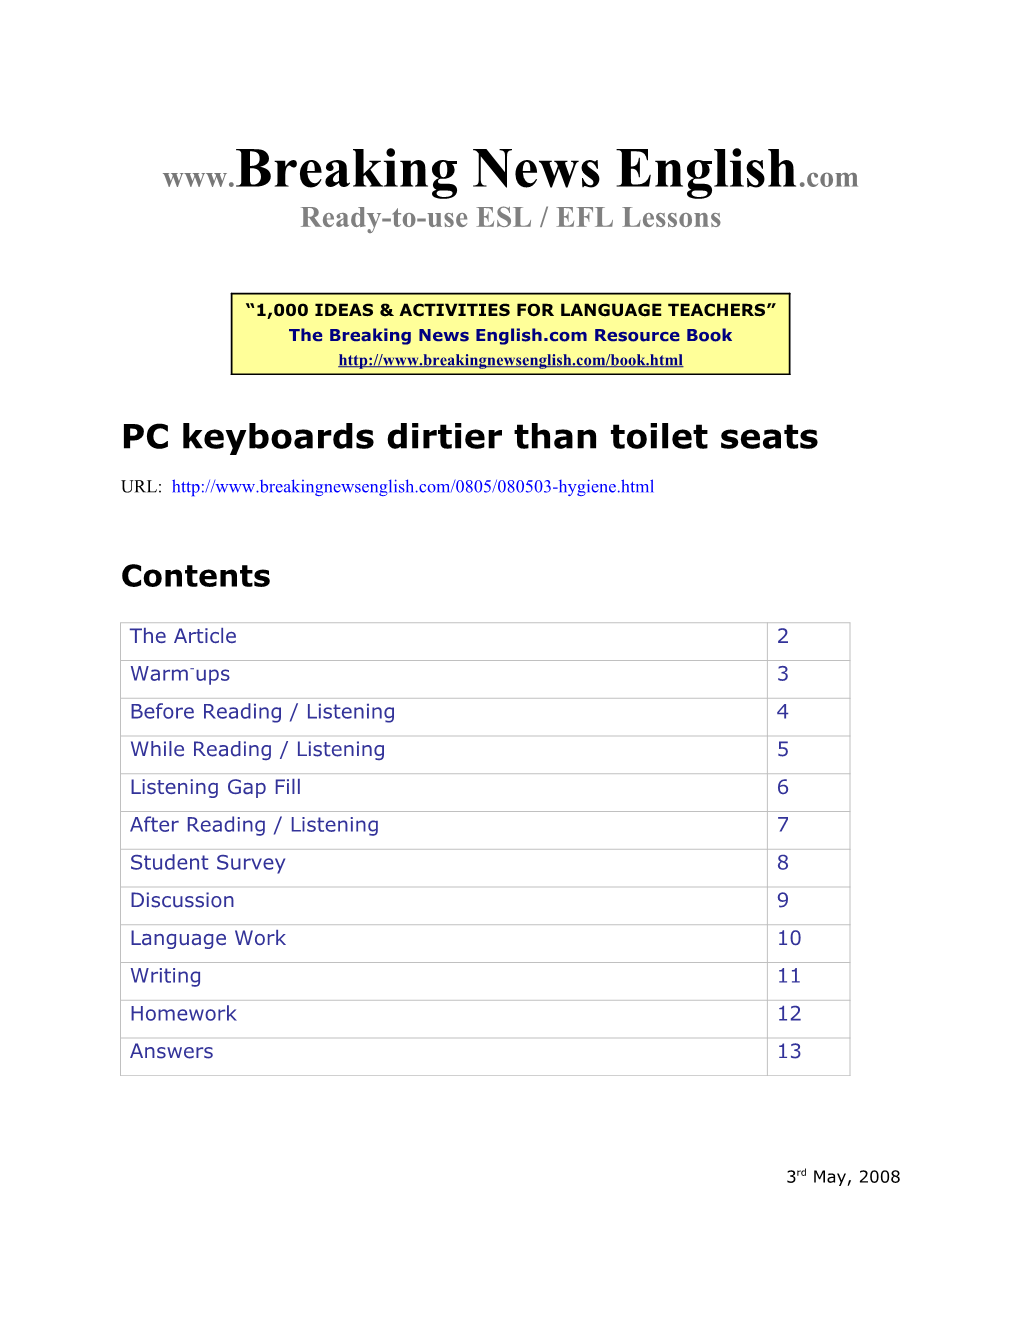 PC Keyboards Dirtier Than Toilet Seats